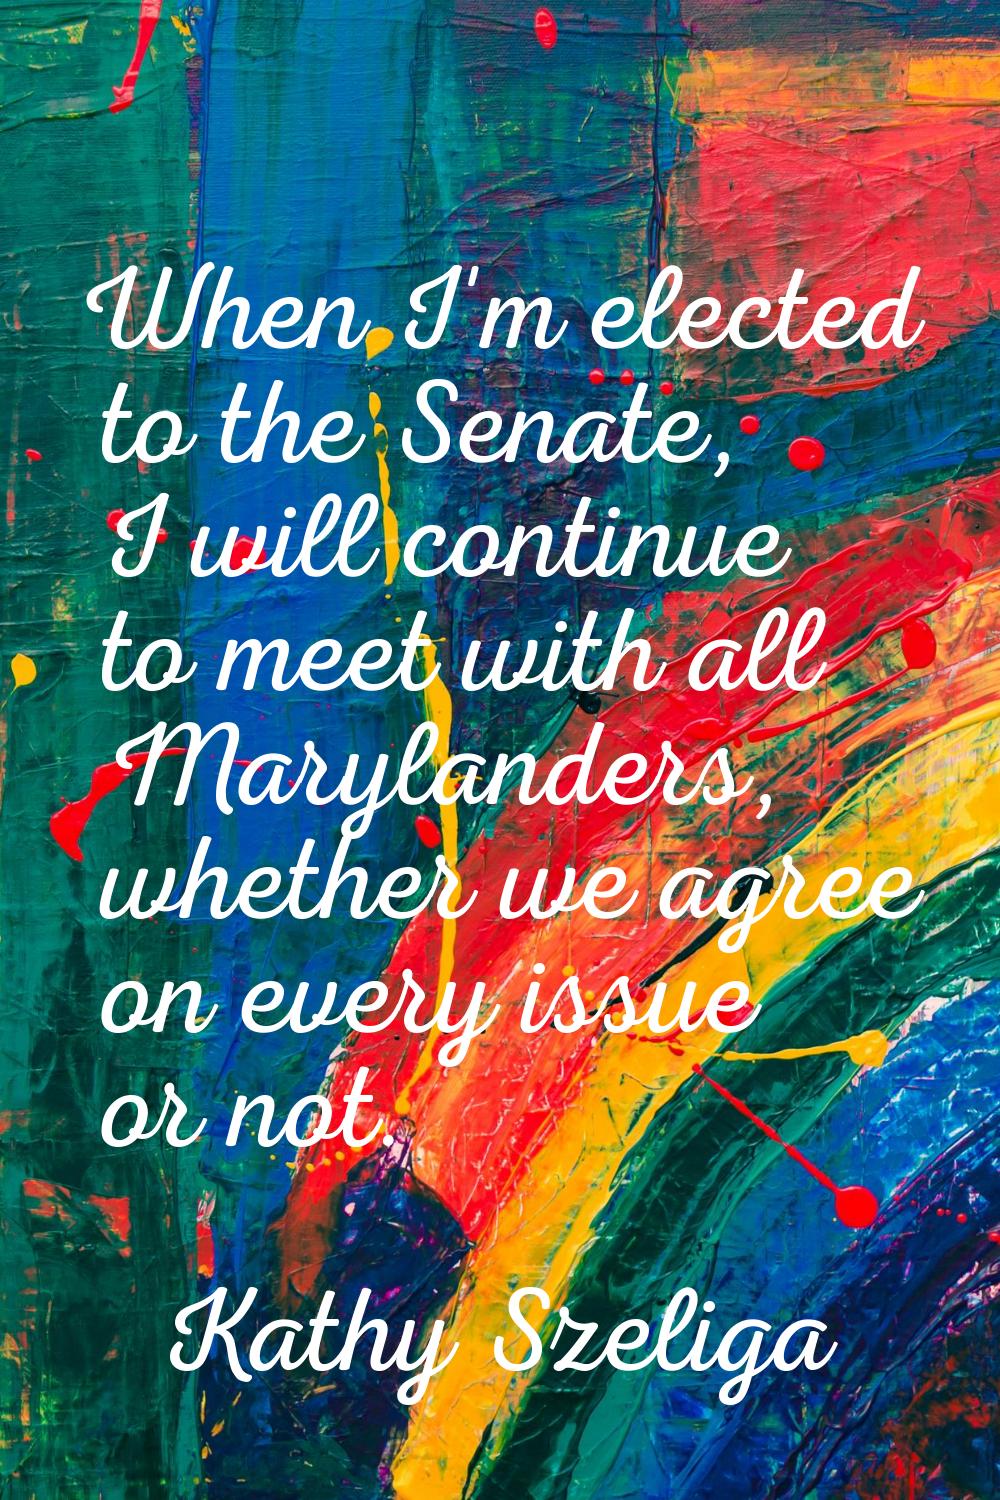 When I'm elected to the Senate, I will continue to meet with all Marylanders, whether we agree on e